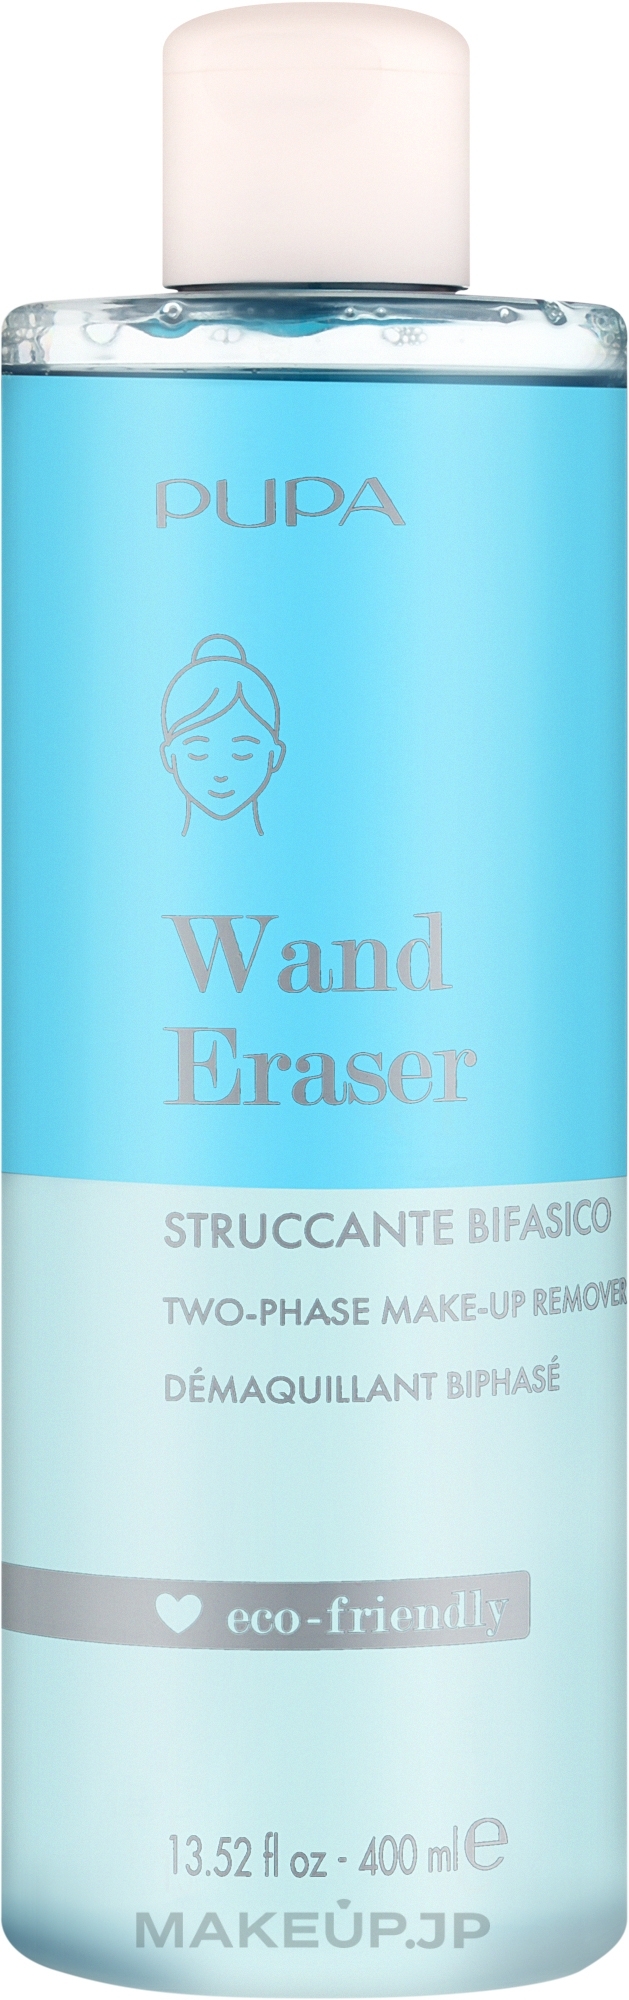 Two-Phase Makeup Remover - Pupa Wand Eraser Two-Phase Makeup Remover — photo 400 ml